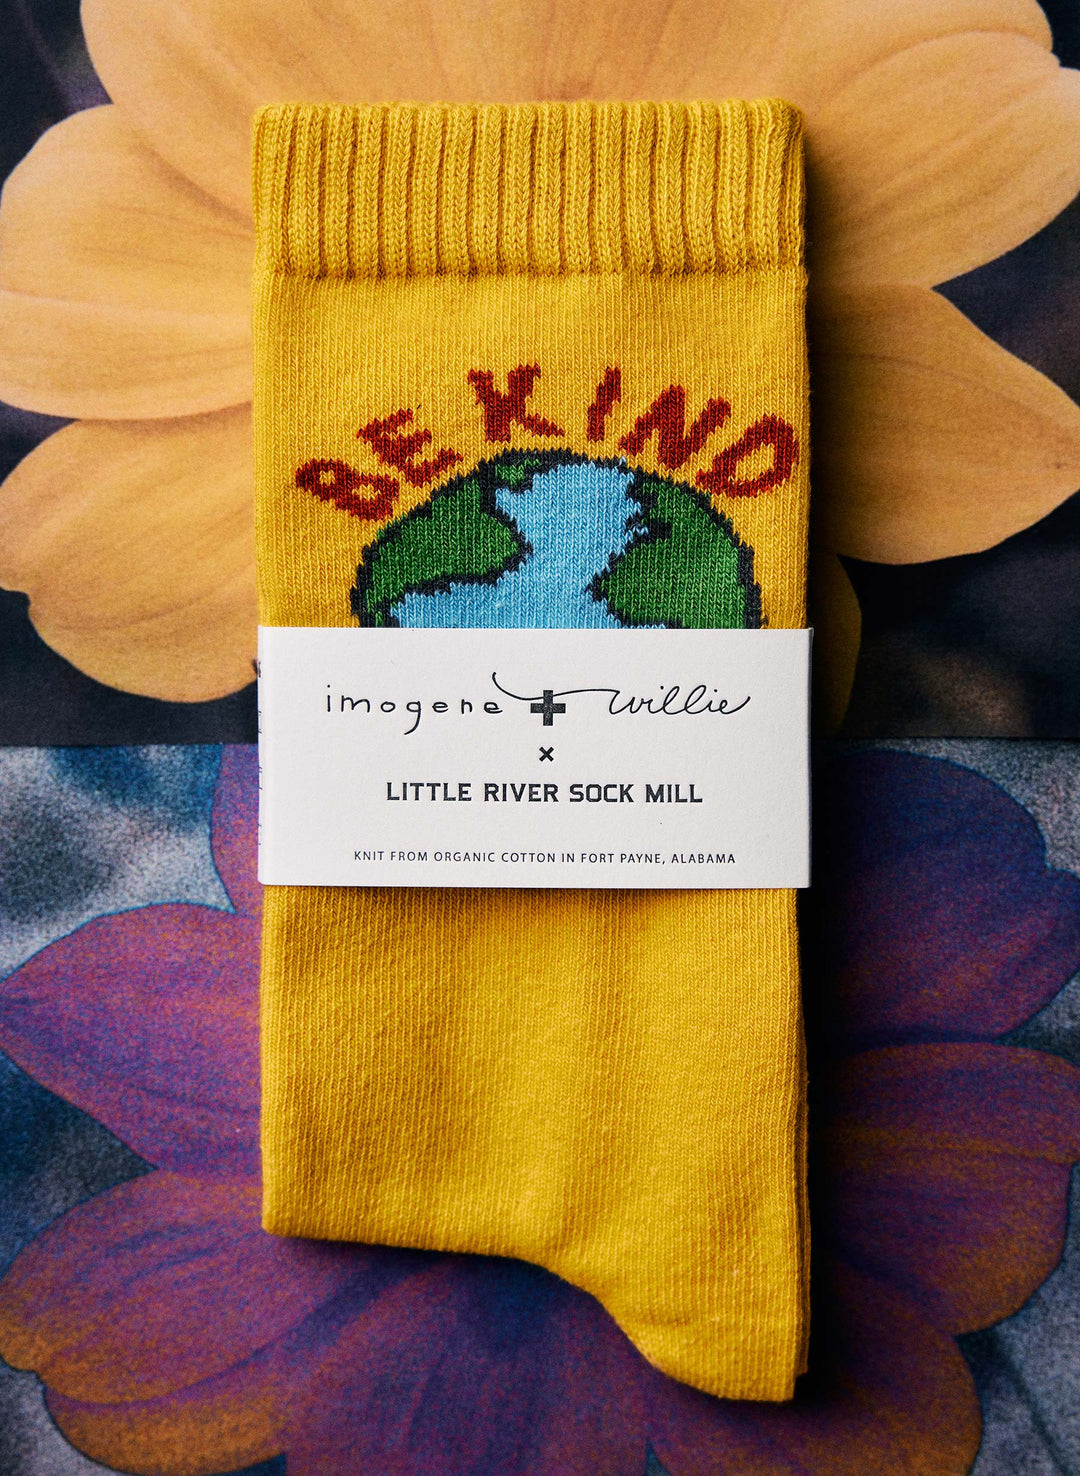 a yellow sock with a white label on it